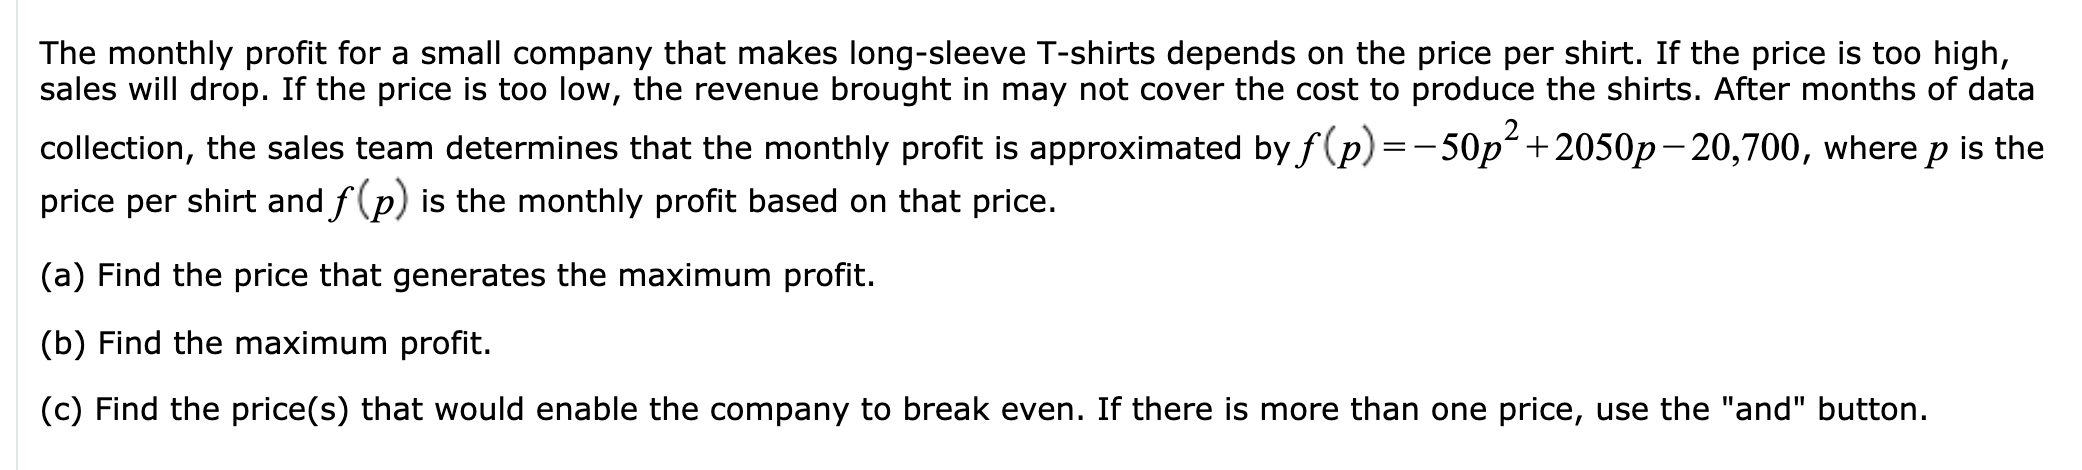 The monthly profit for a small company that makes long-sleeve T-shirts depends on the price per shirt. If the price is too high,
sales will drop. If the price is too low, the revenue brought in may not cover the cost to produce the shirts. After months of data
collection, the sales team determines that the monthly profit is approximated byf(p) =-50p +2050p-20,700, where p is the
price per shirt and f(p) is the monthly profit based on that price.
(a) Find the price that generates the maximum profit.
(b) Find the maximum profit.
(c) Find the price(s) that would enable the company to break even. If there is more than one price, use the "and" button.
